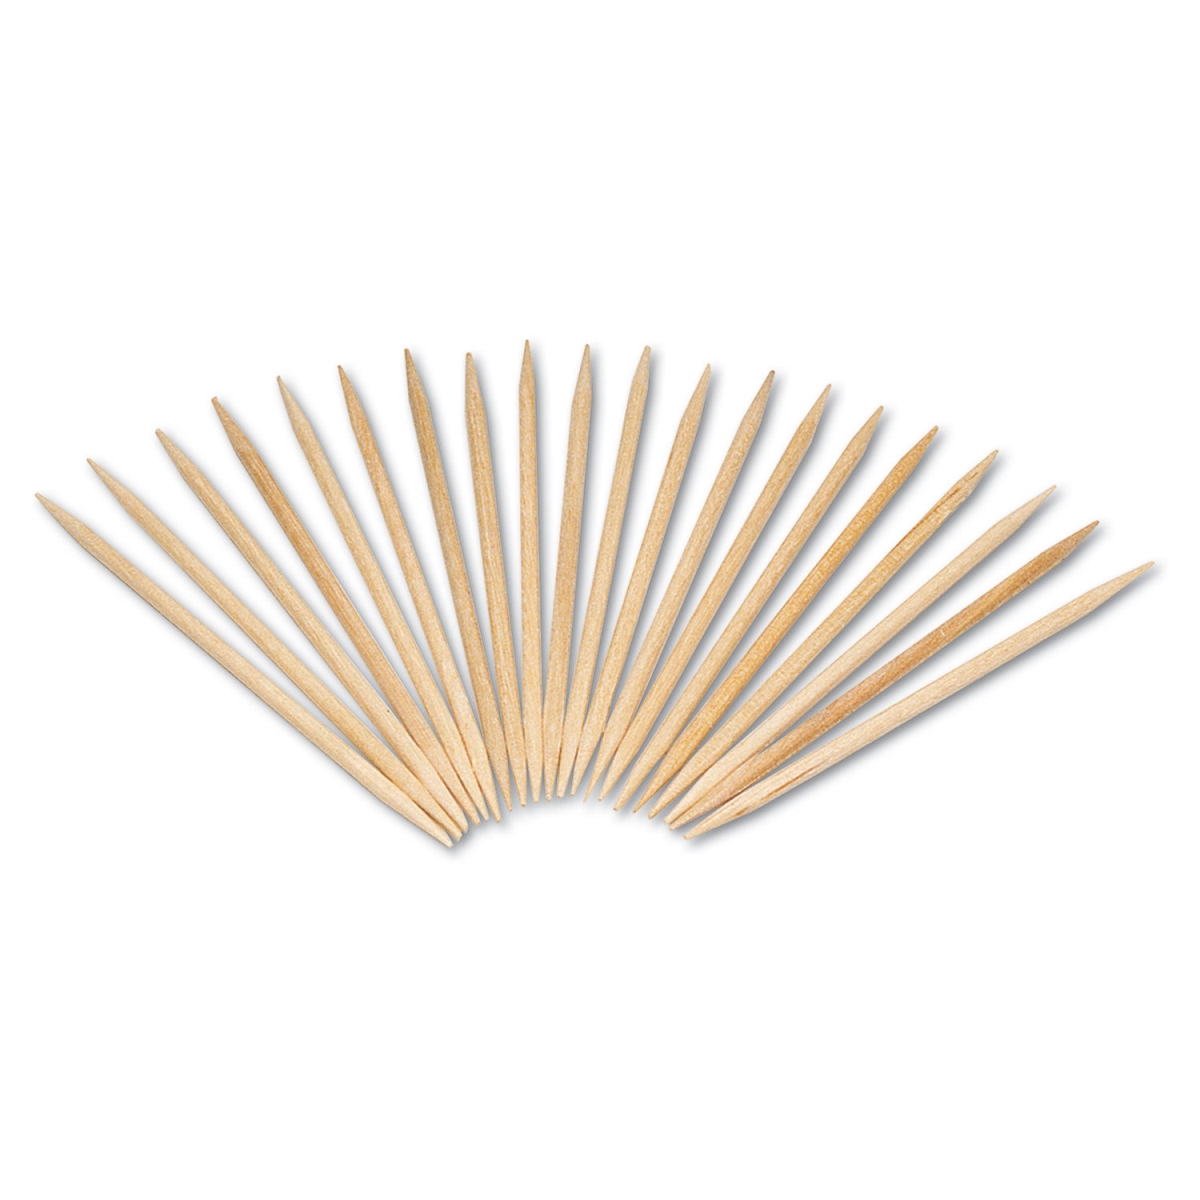 Picture of AmerCareRoyal RPPR820 Round Wood Toothpicks - 2.5 in. - Natural - 800 per Box - 24 Box per Case